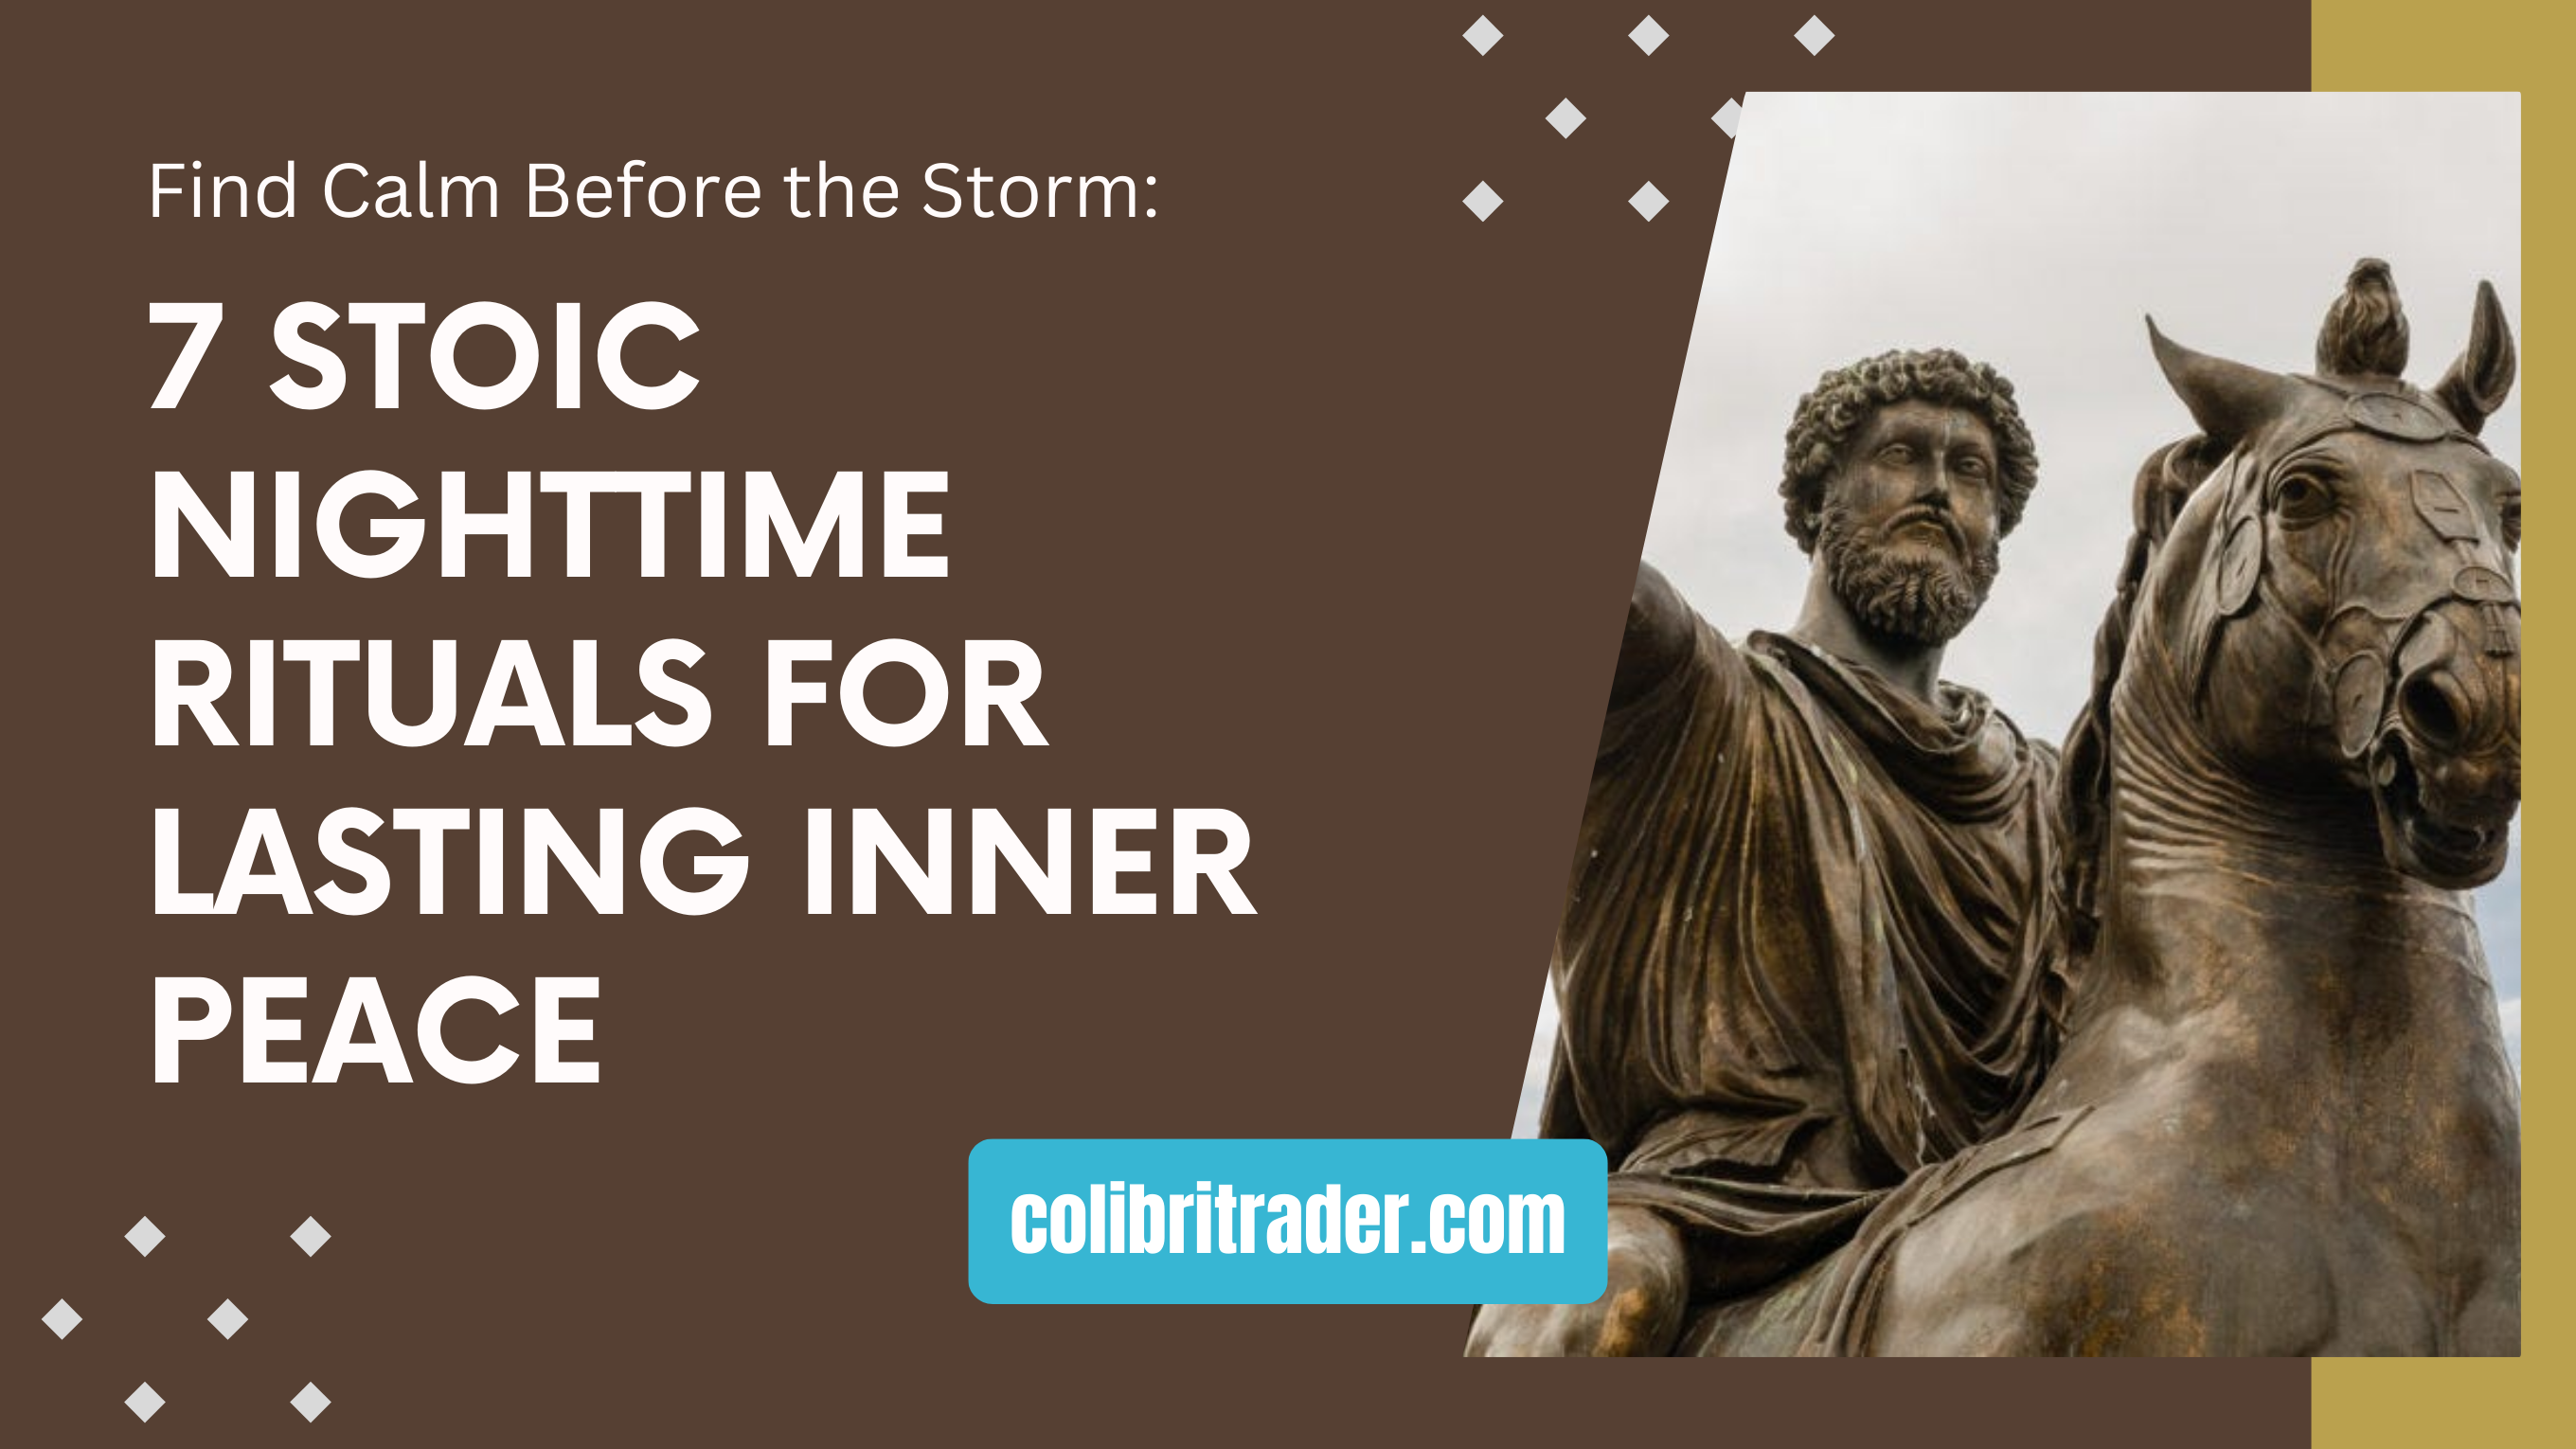 Find Calm Before the Storm: 7 Stoic Nighttime Rituals for Lasting Inner Peace